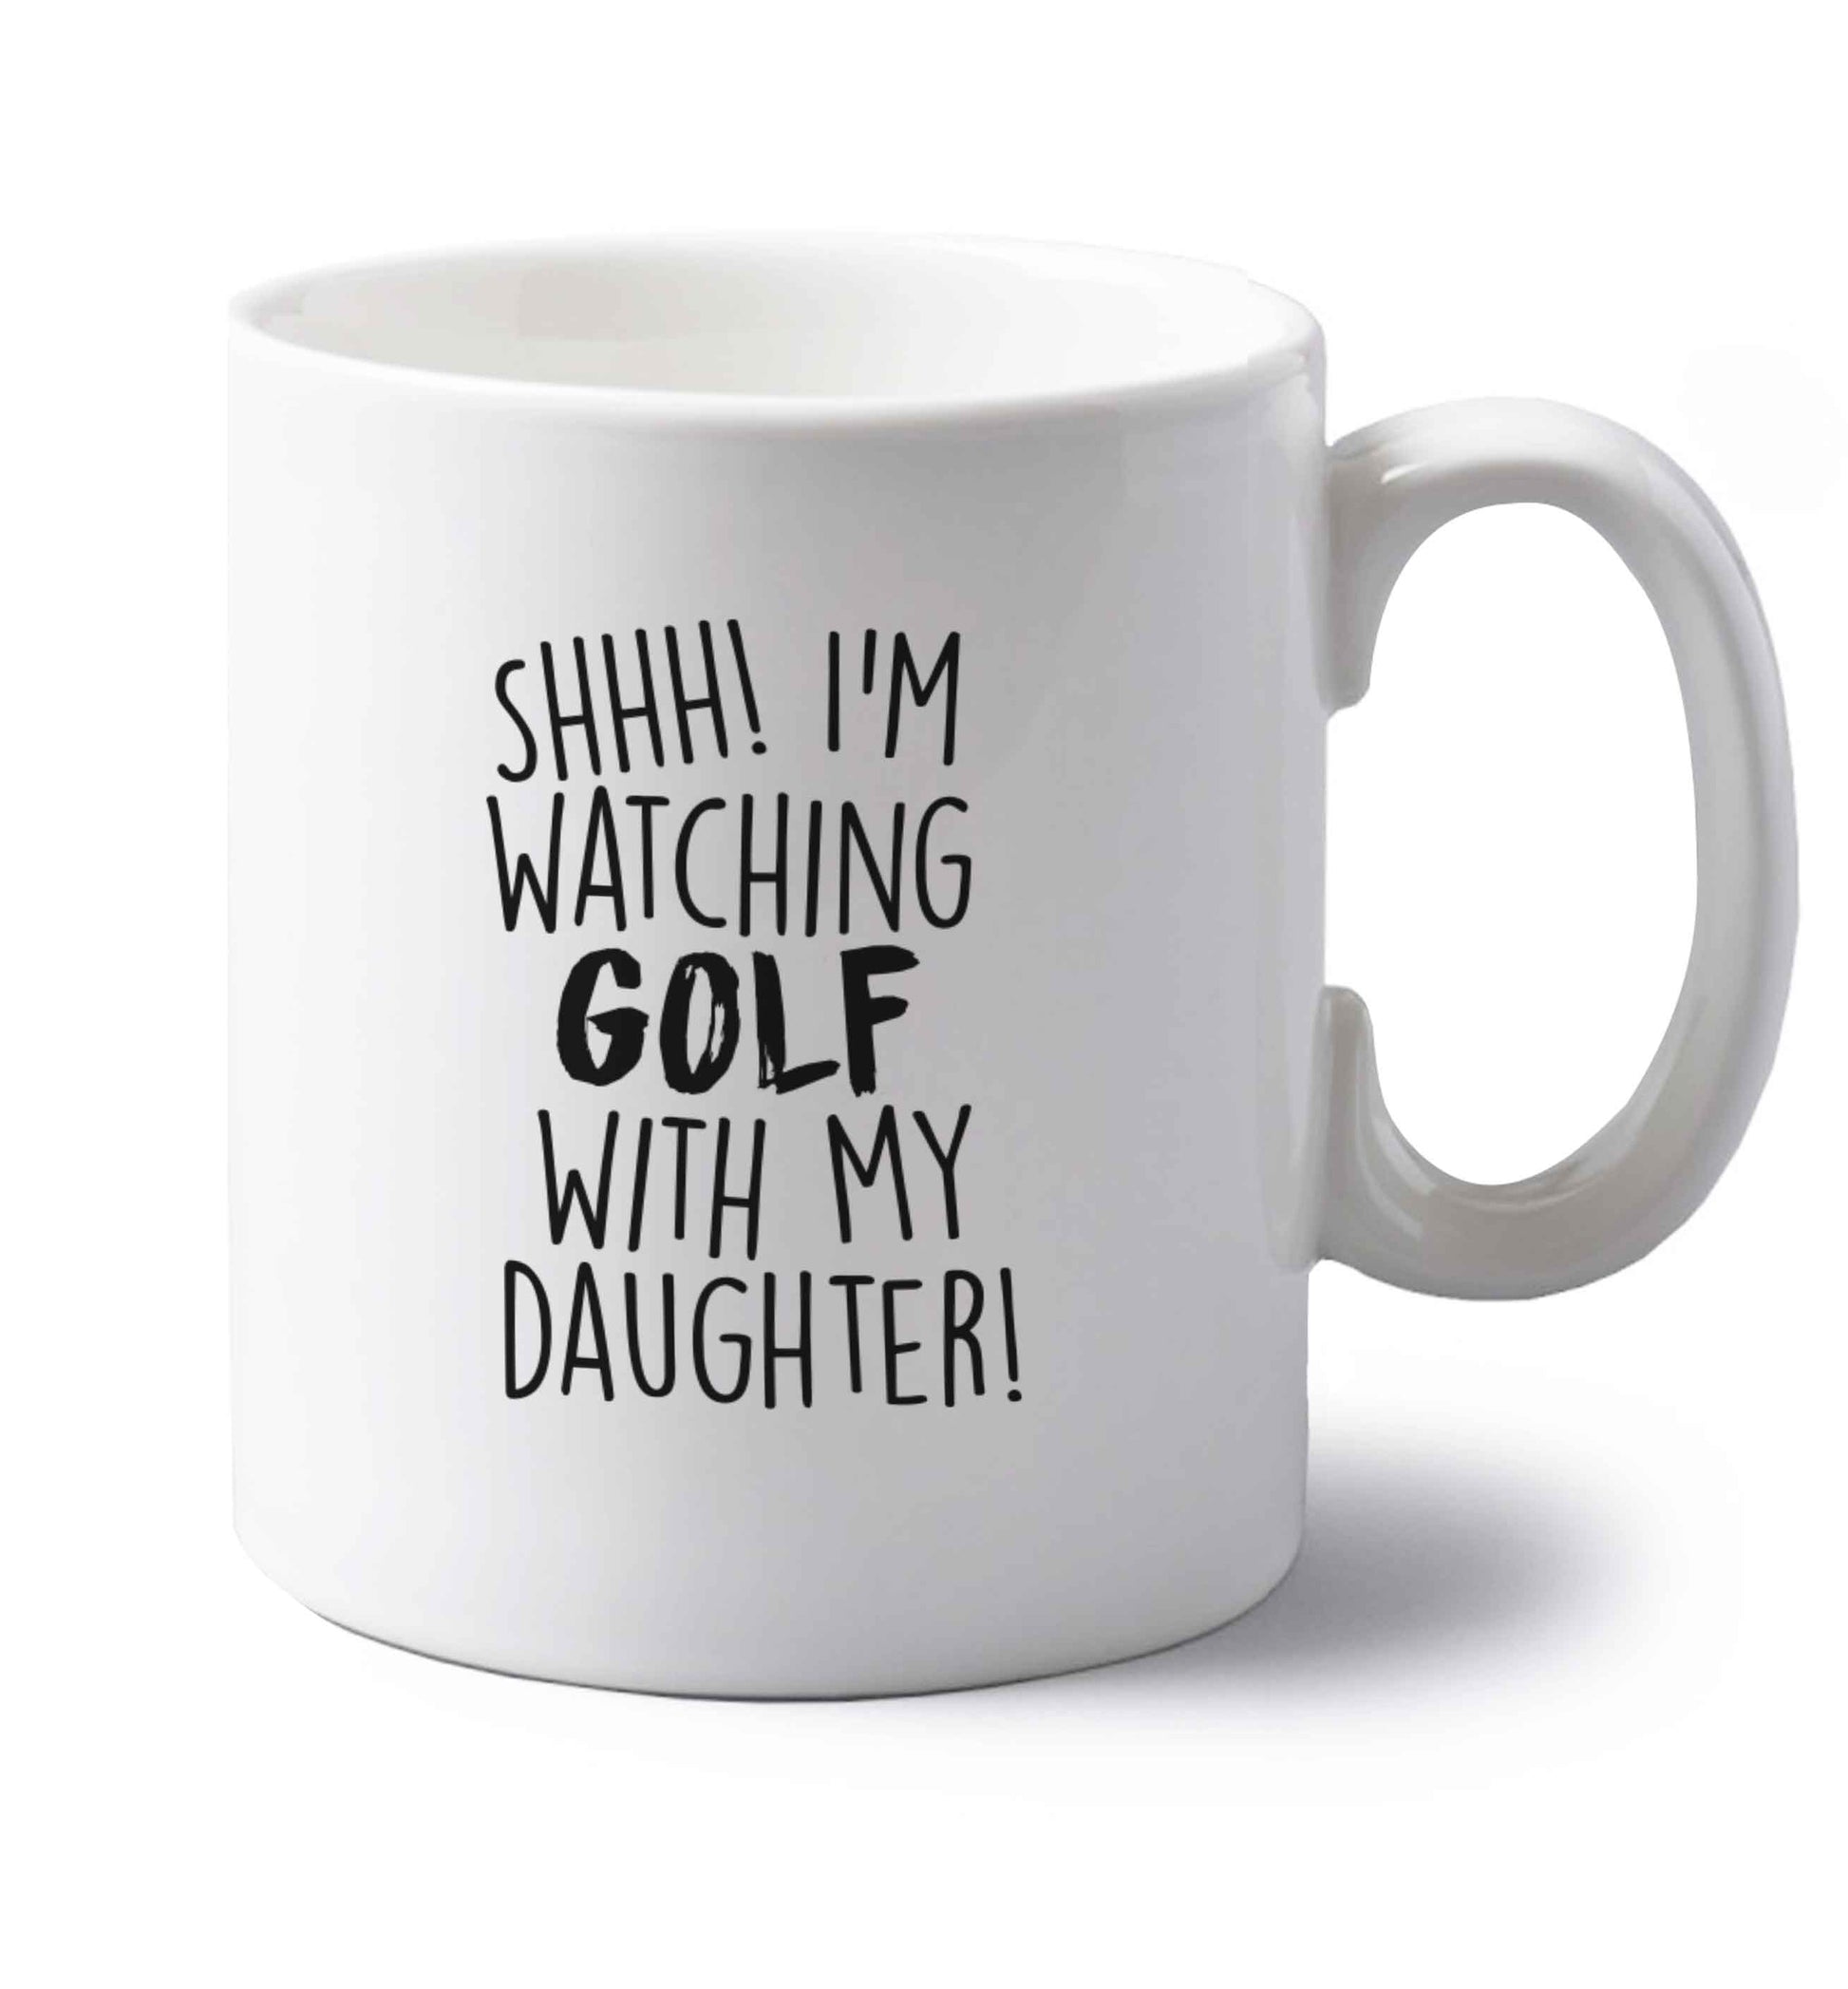 Shh I'm watching golf with my daughter left handed white ceramic mug 